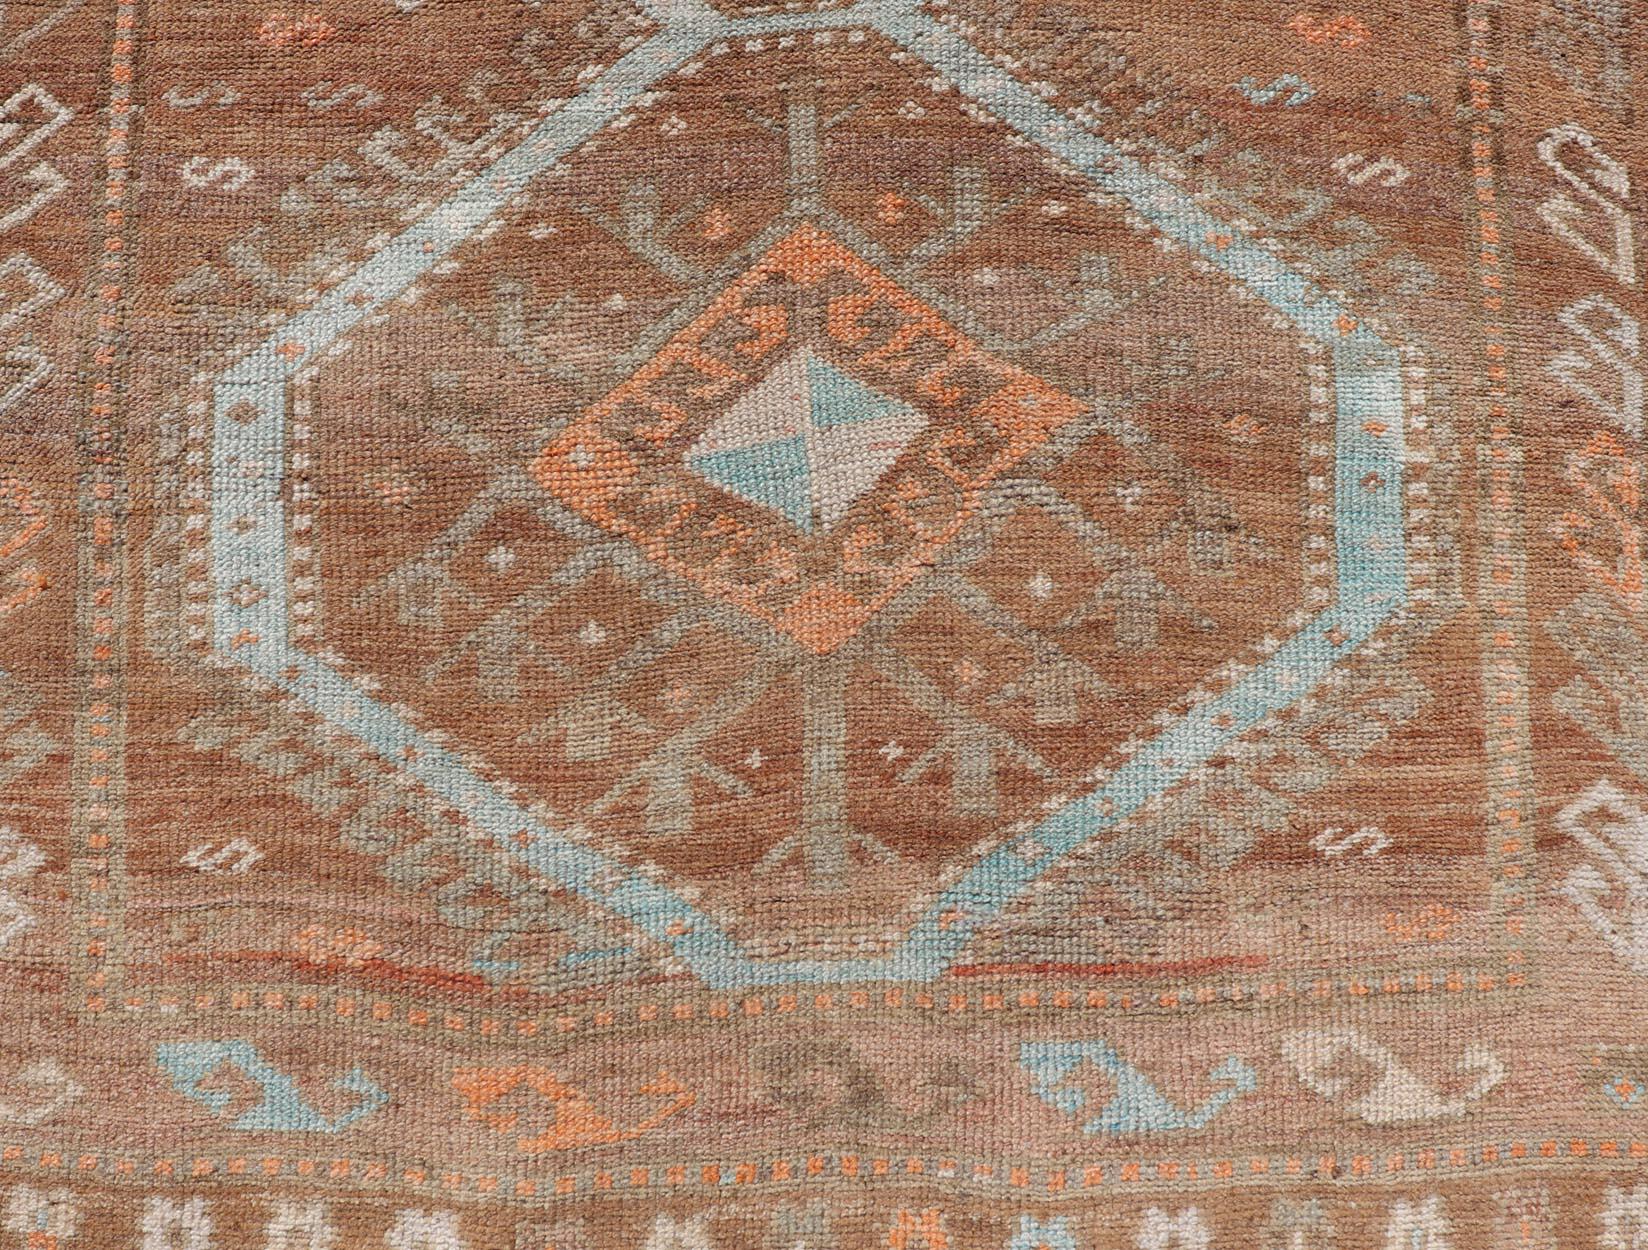 Colorful Turkish Kars Runner in Softer Tones with Tribal and Geometric Motifs For Sale 5